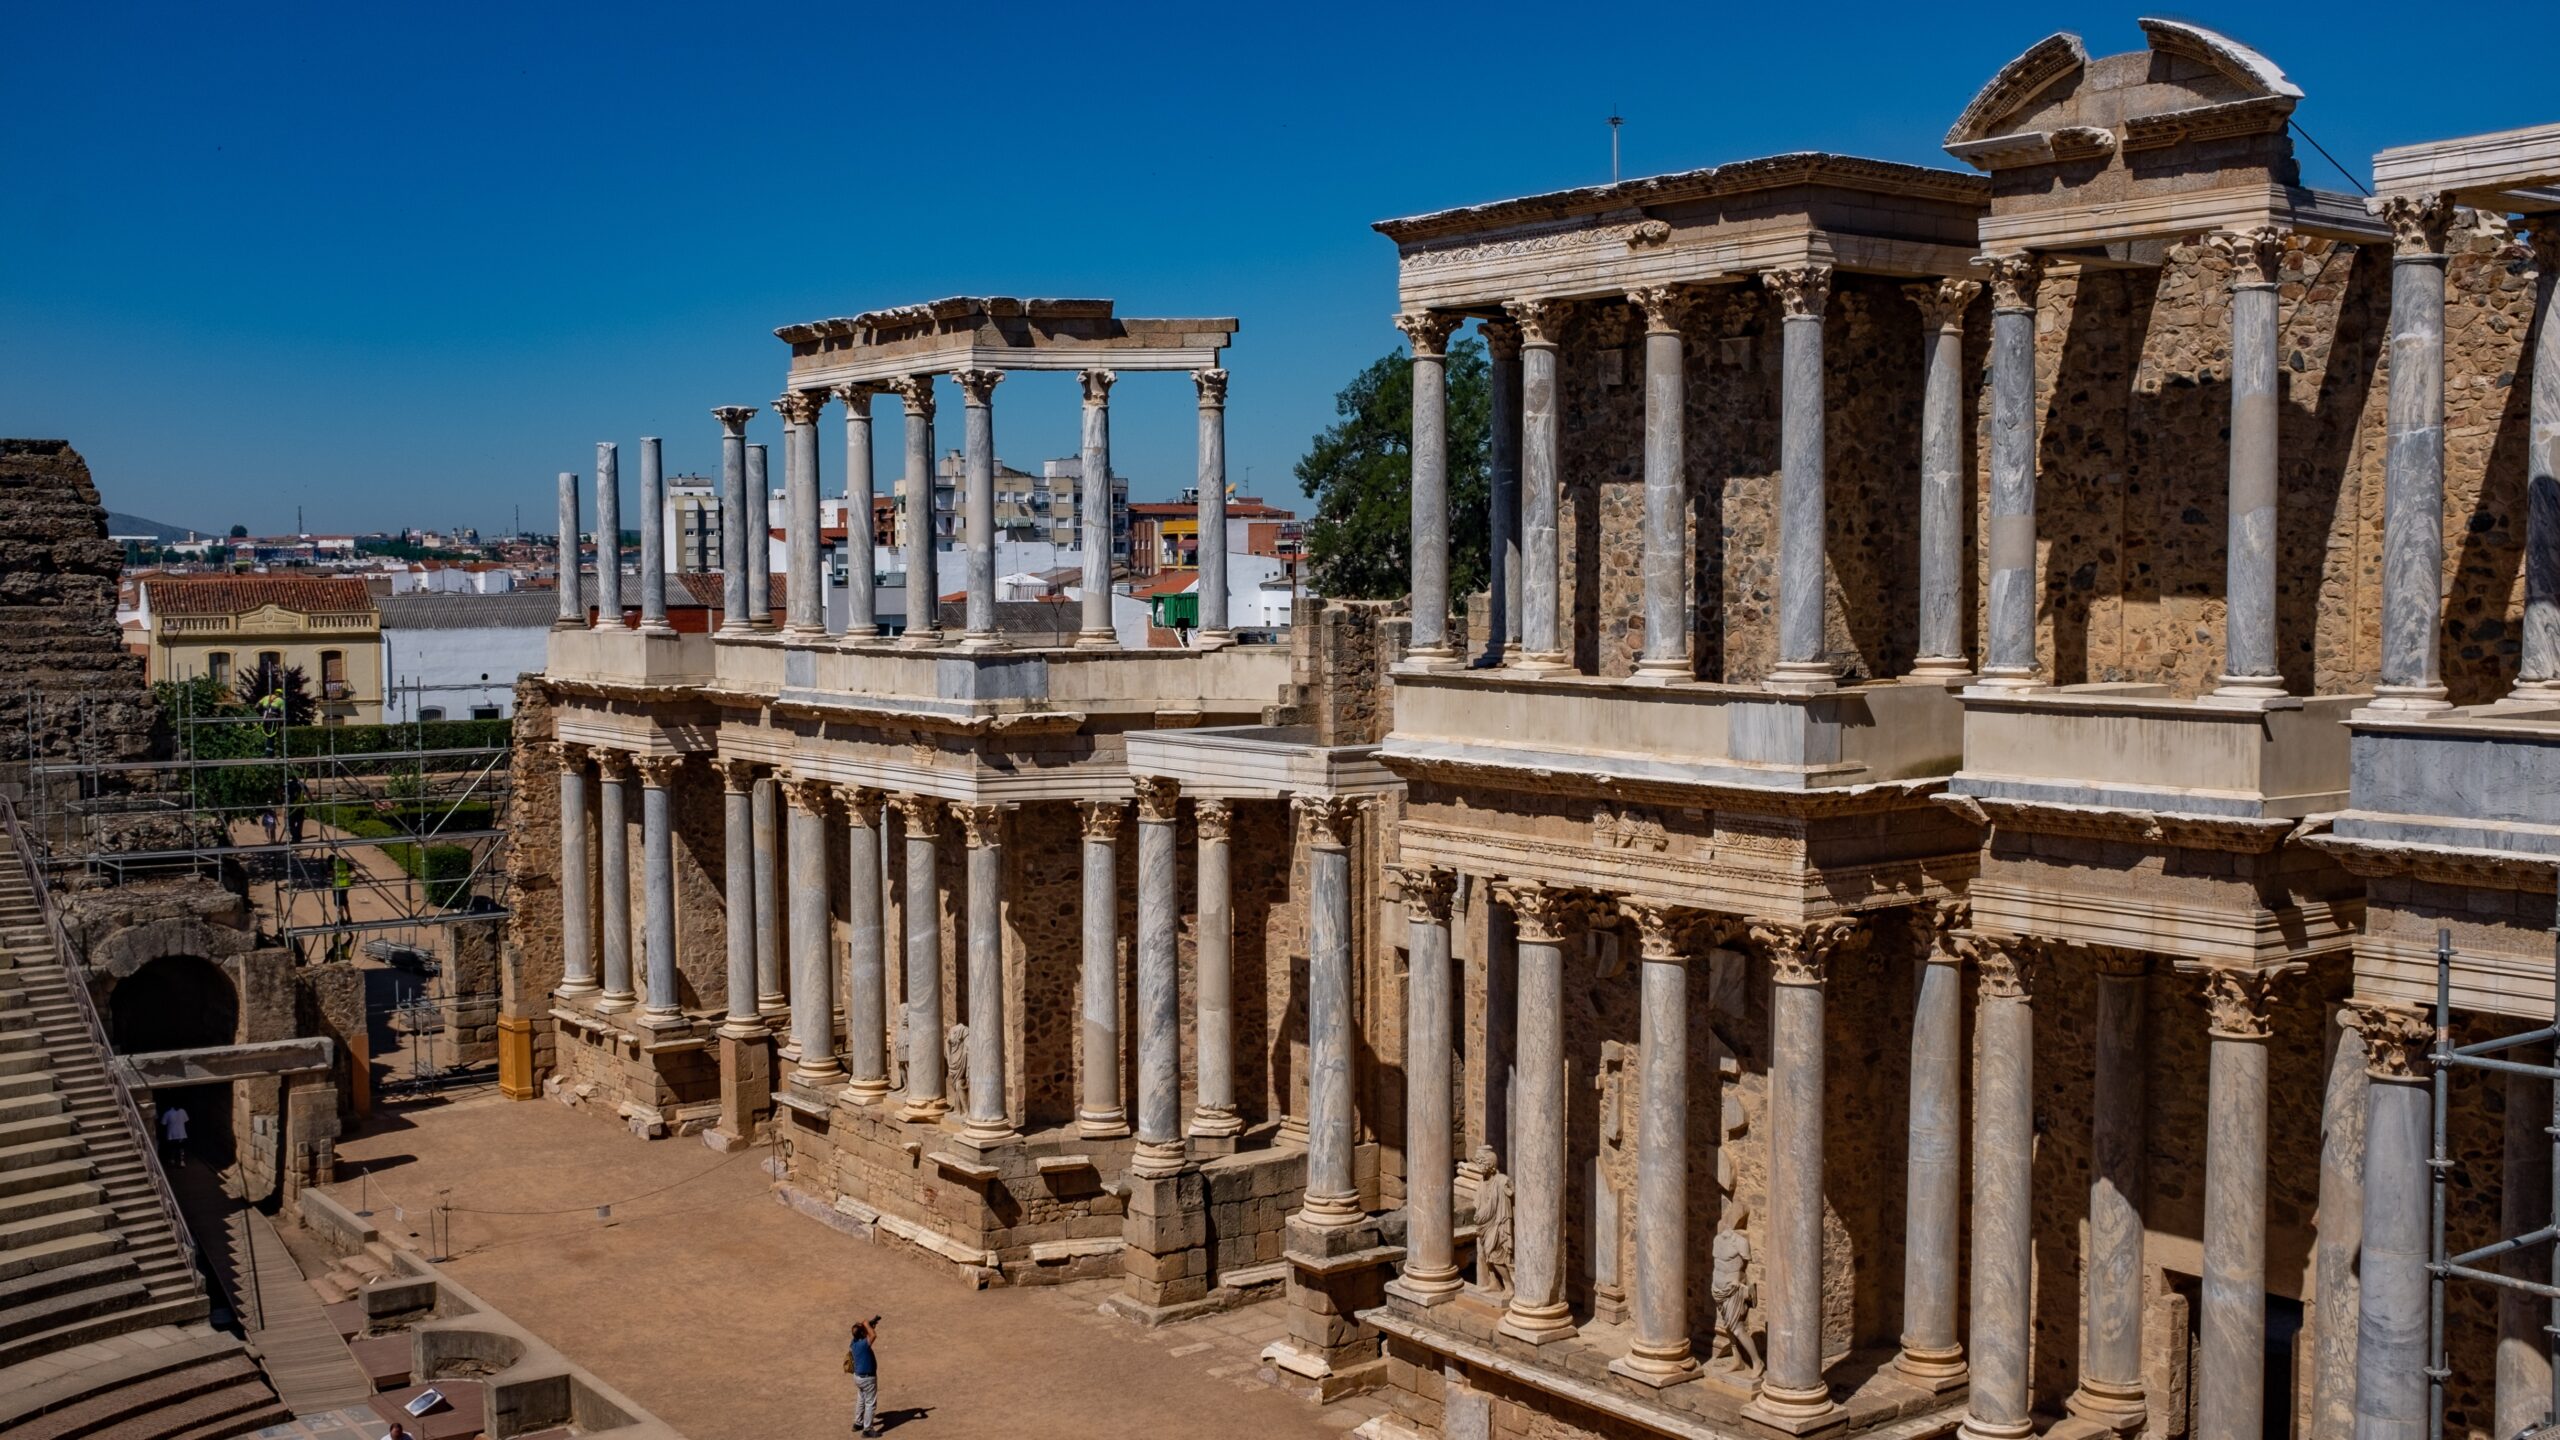 Merida, Spain was a capital of the Roman Empire and is still standing today. Learn more on why its a necessary place to visit.
pictured: the ancient city of Merida